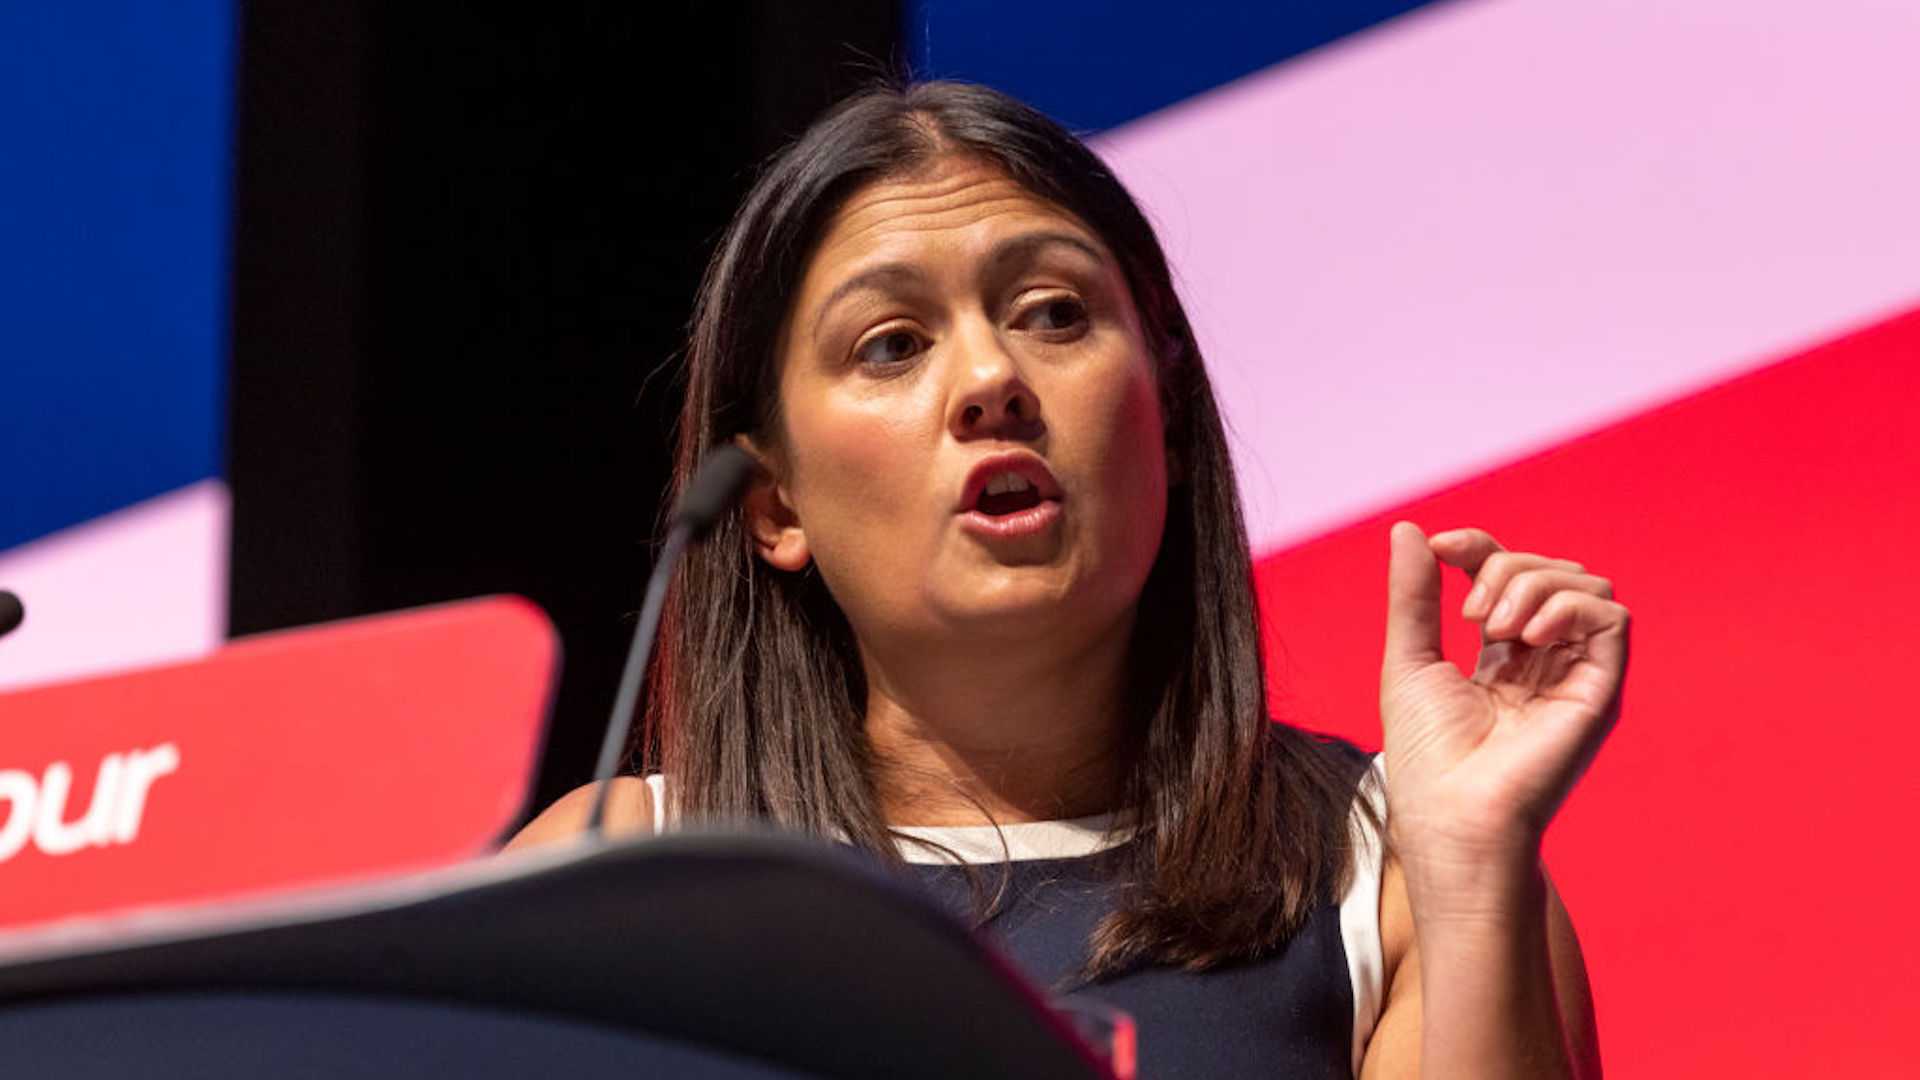 Lisa Nandy stands a t a lectern with Labour on the front and a union jack behind her